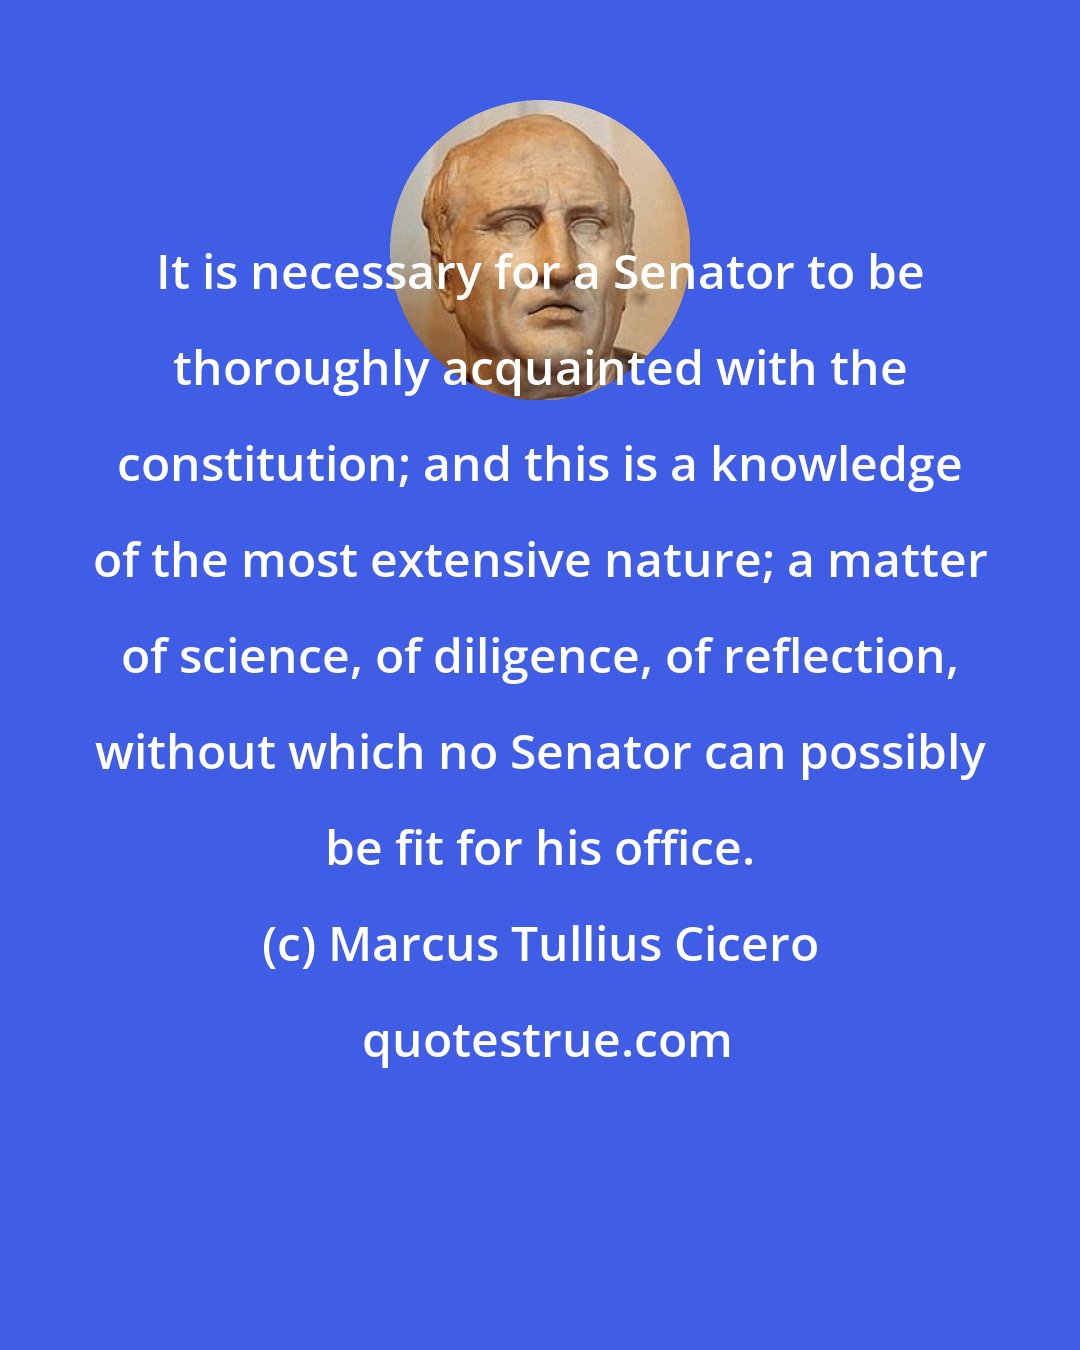 Marcus Tullius Cicero: It is necessary for a Senator to be thoroughly acquainted with the constitution; and this is a knowledge of the most extensive nature; a matter of science, of diligence, of reflection, without which no Senator can possibly be fit for his office.